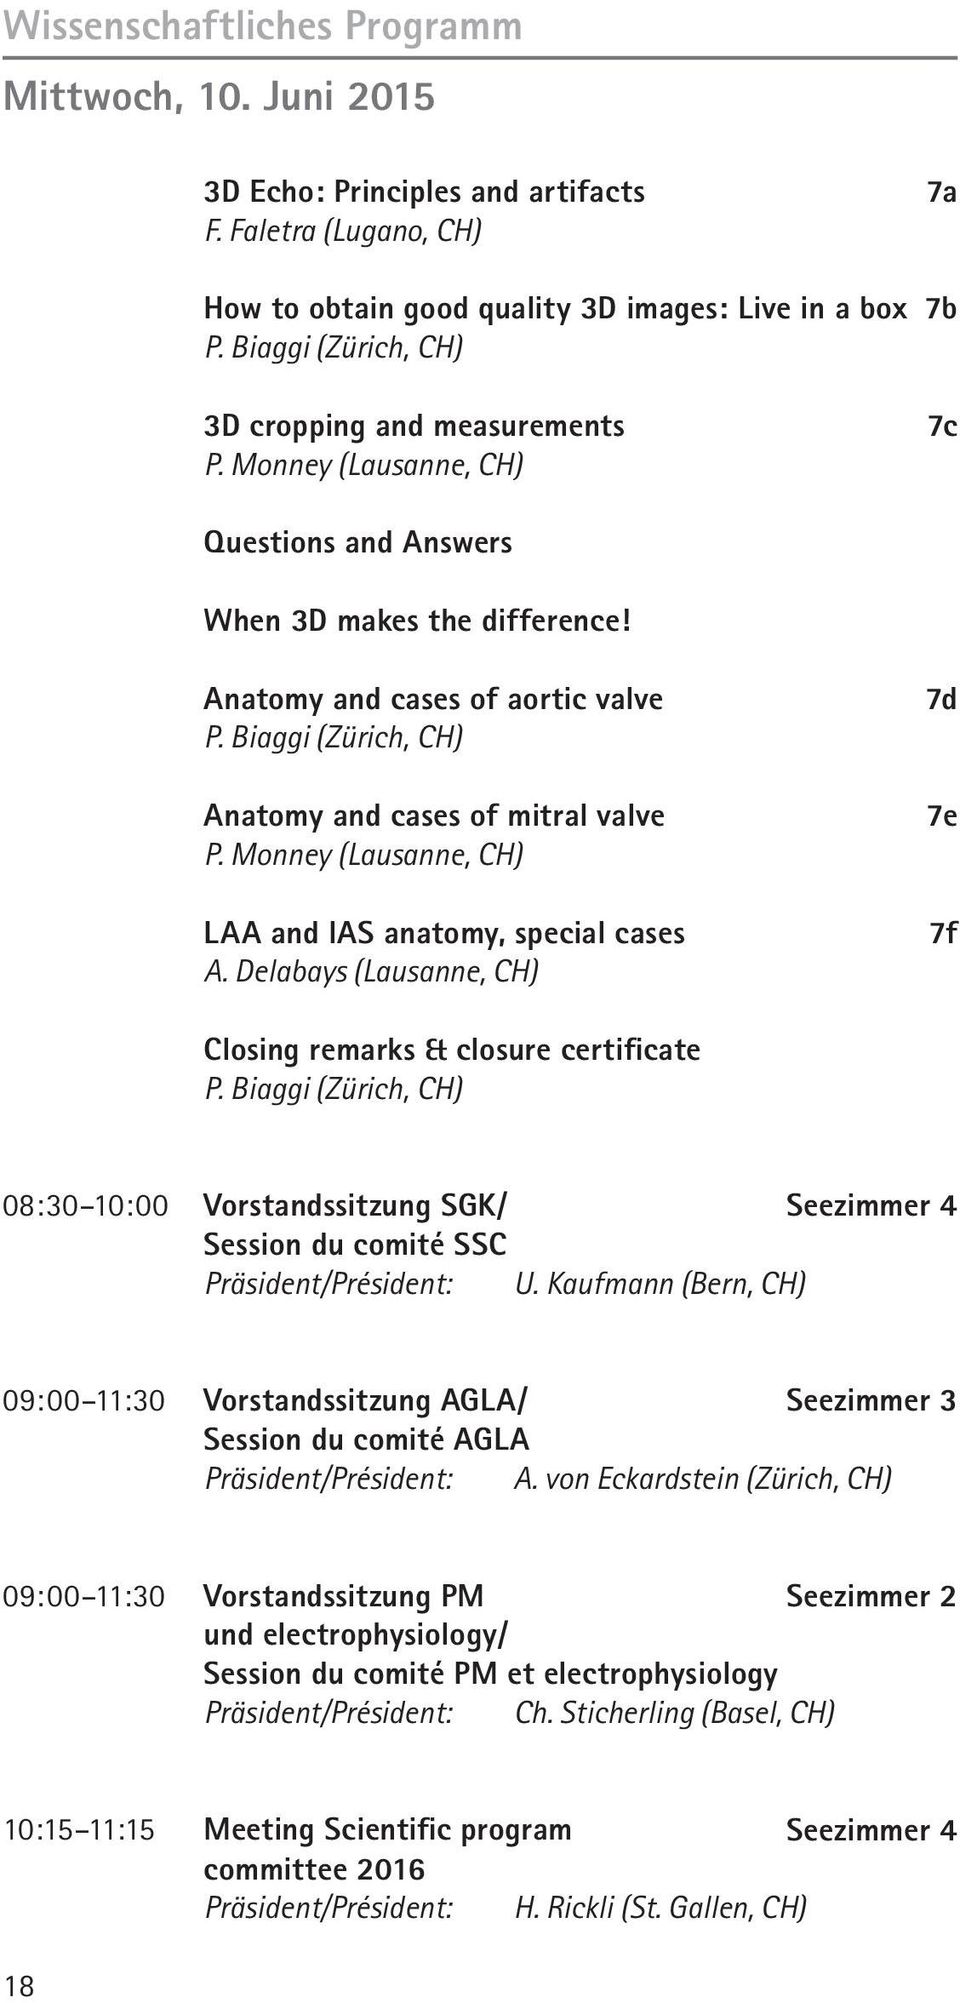 Biaggi (Zürich, CH) Anatomy and cases of mitral valve P. Monney (Lausanne, CH) LAA and IAS anatomy, special cases A. Delabays (Lausanne, CH) 7d 7e 7f Closing remarks & closure certificate P.